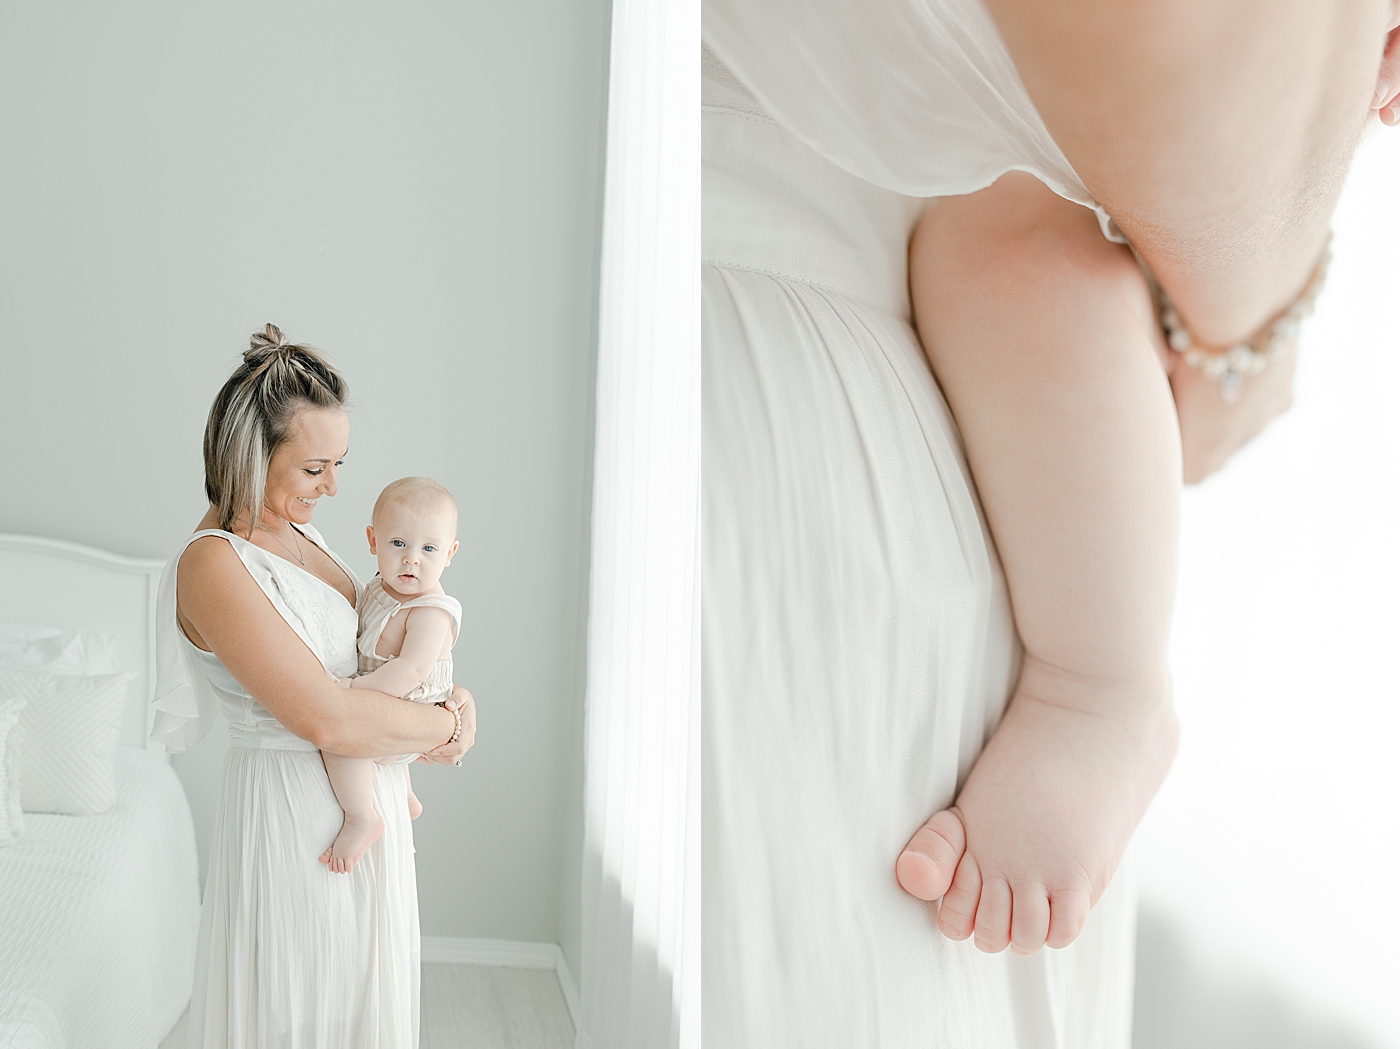 Mom in white dress holding baby boy in striped overalls | Photo by Hattiesburg Baby Photographer Little Sunshine Photography